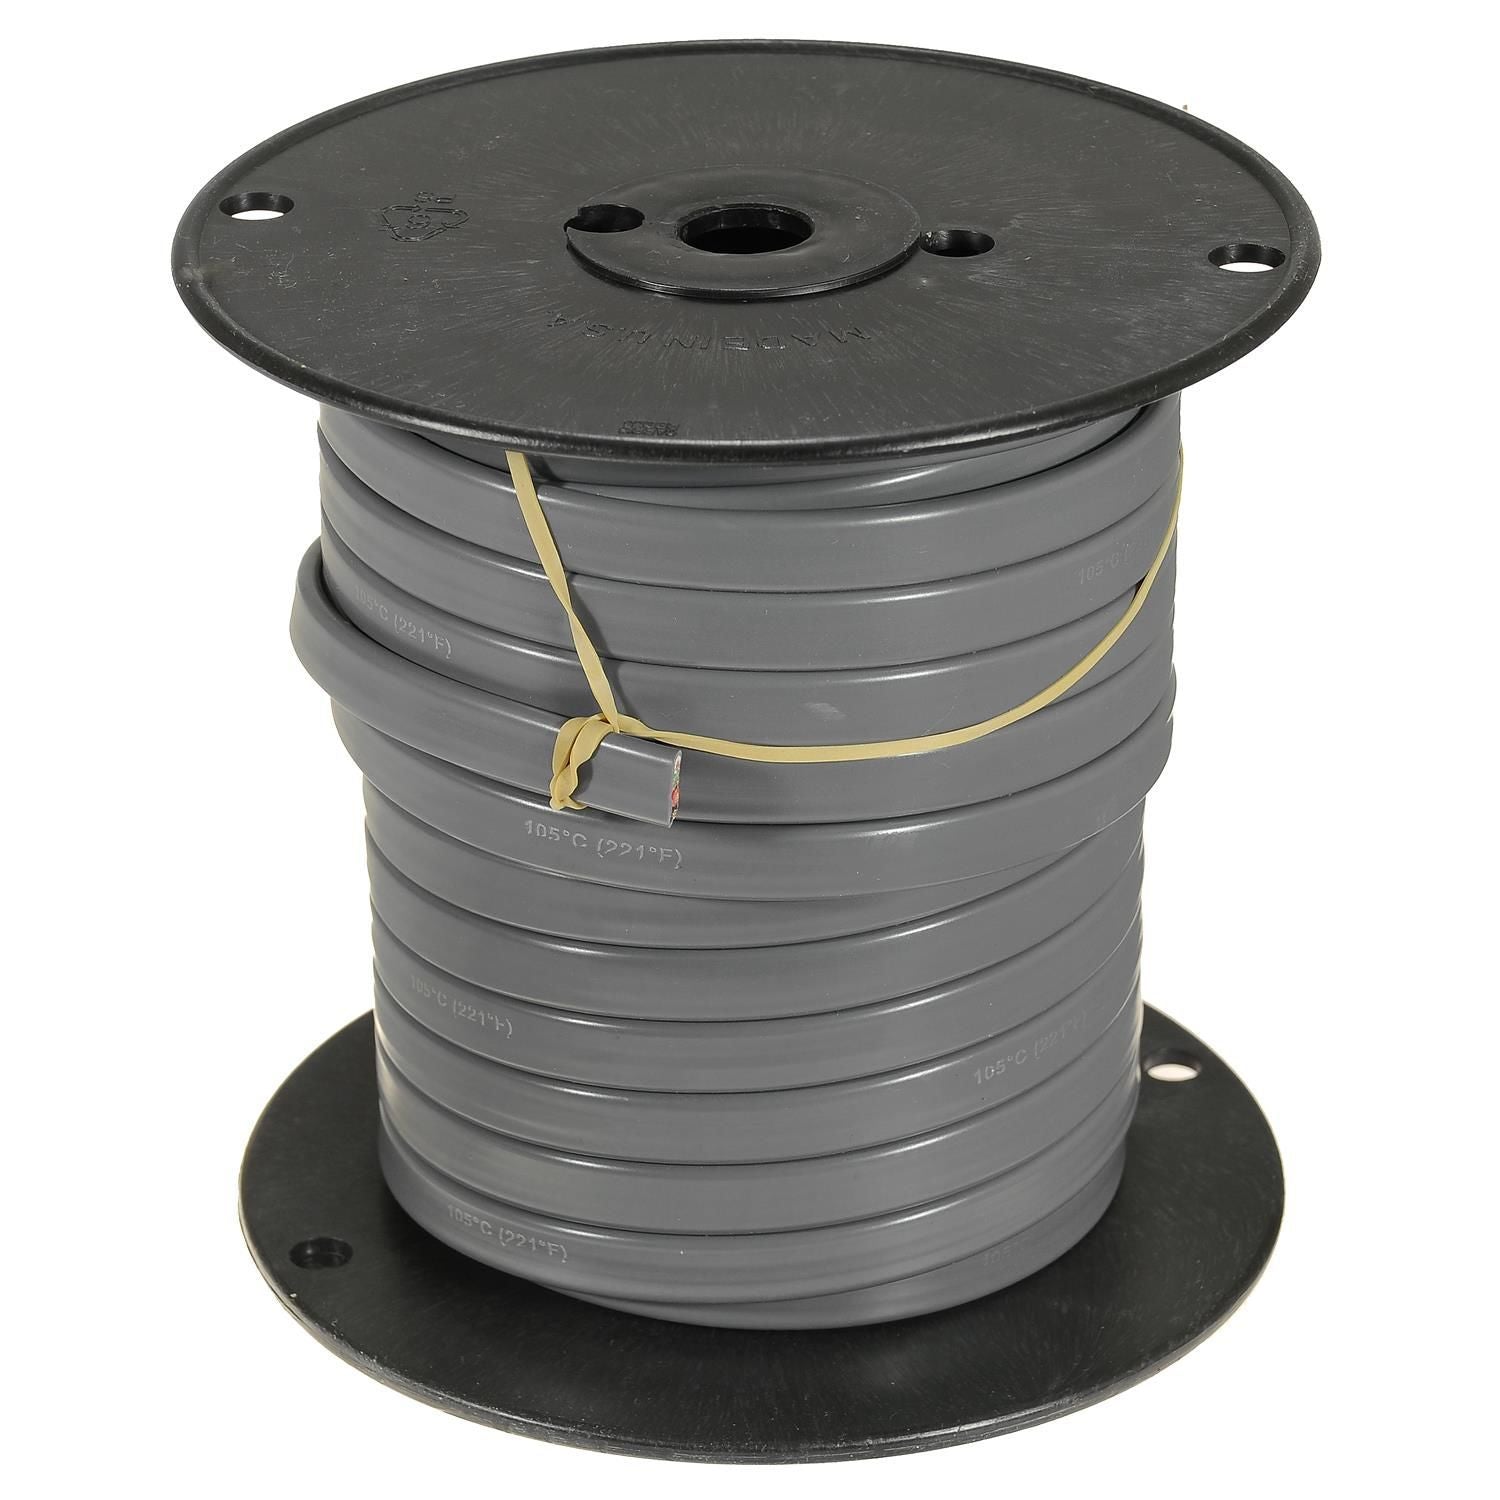 YSP WR130-100 Wells Flat Multi-Conductor Primary Wire (14G, 4 Wire)